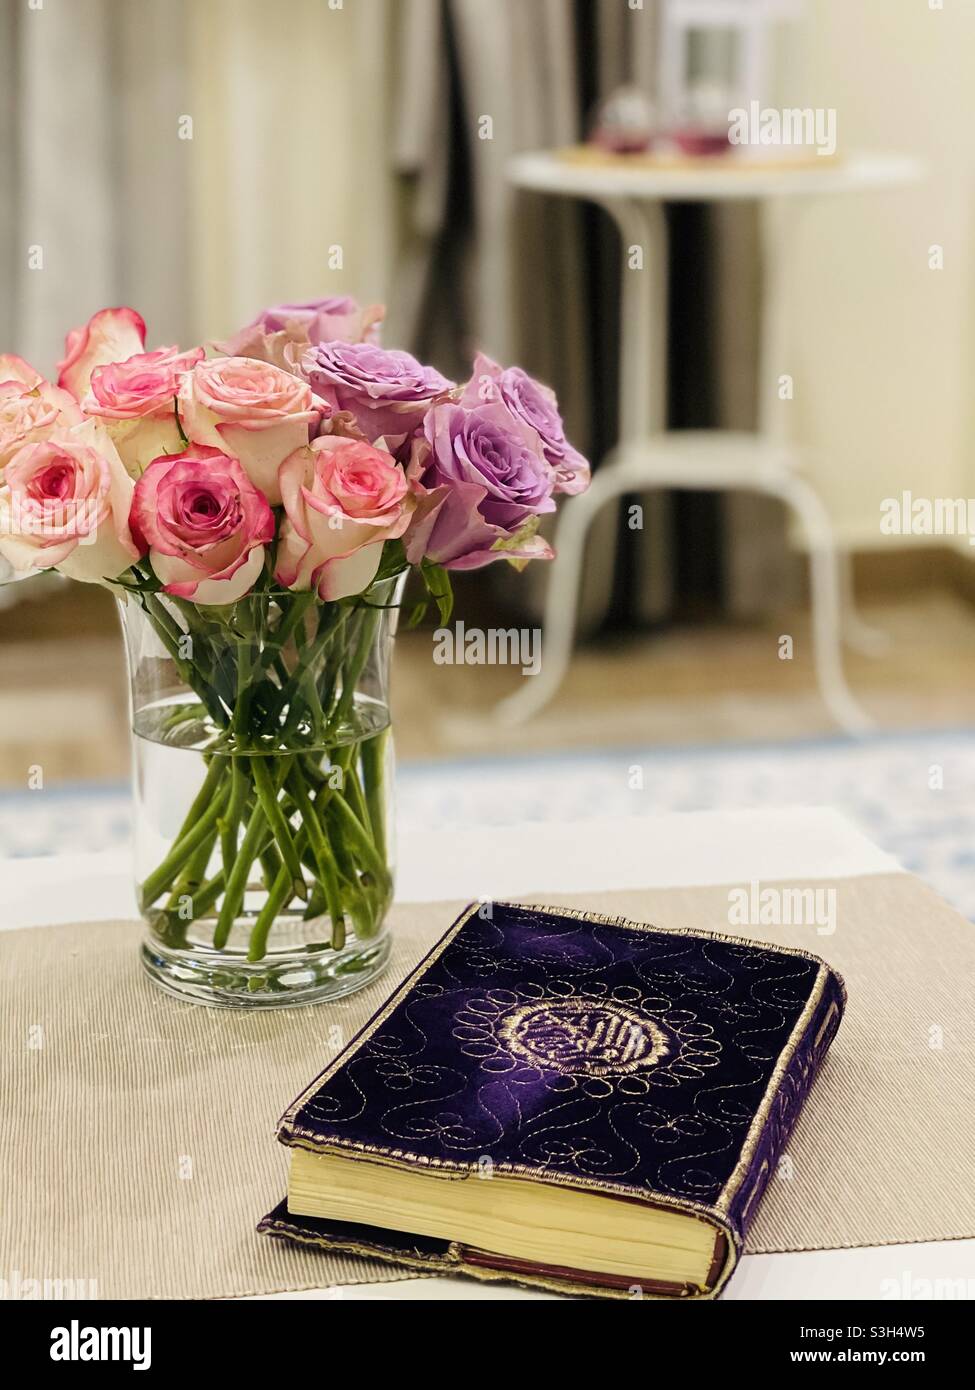 Holly quran and beauty flowers in my home  Stock Photo - Alamy